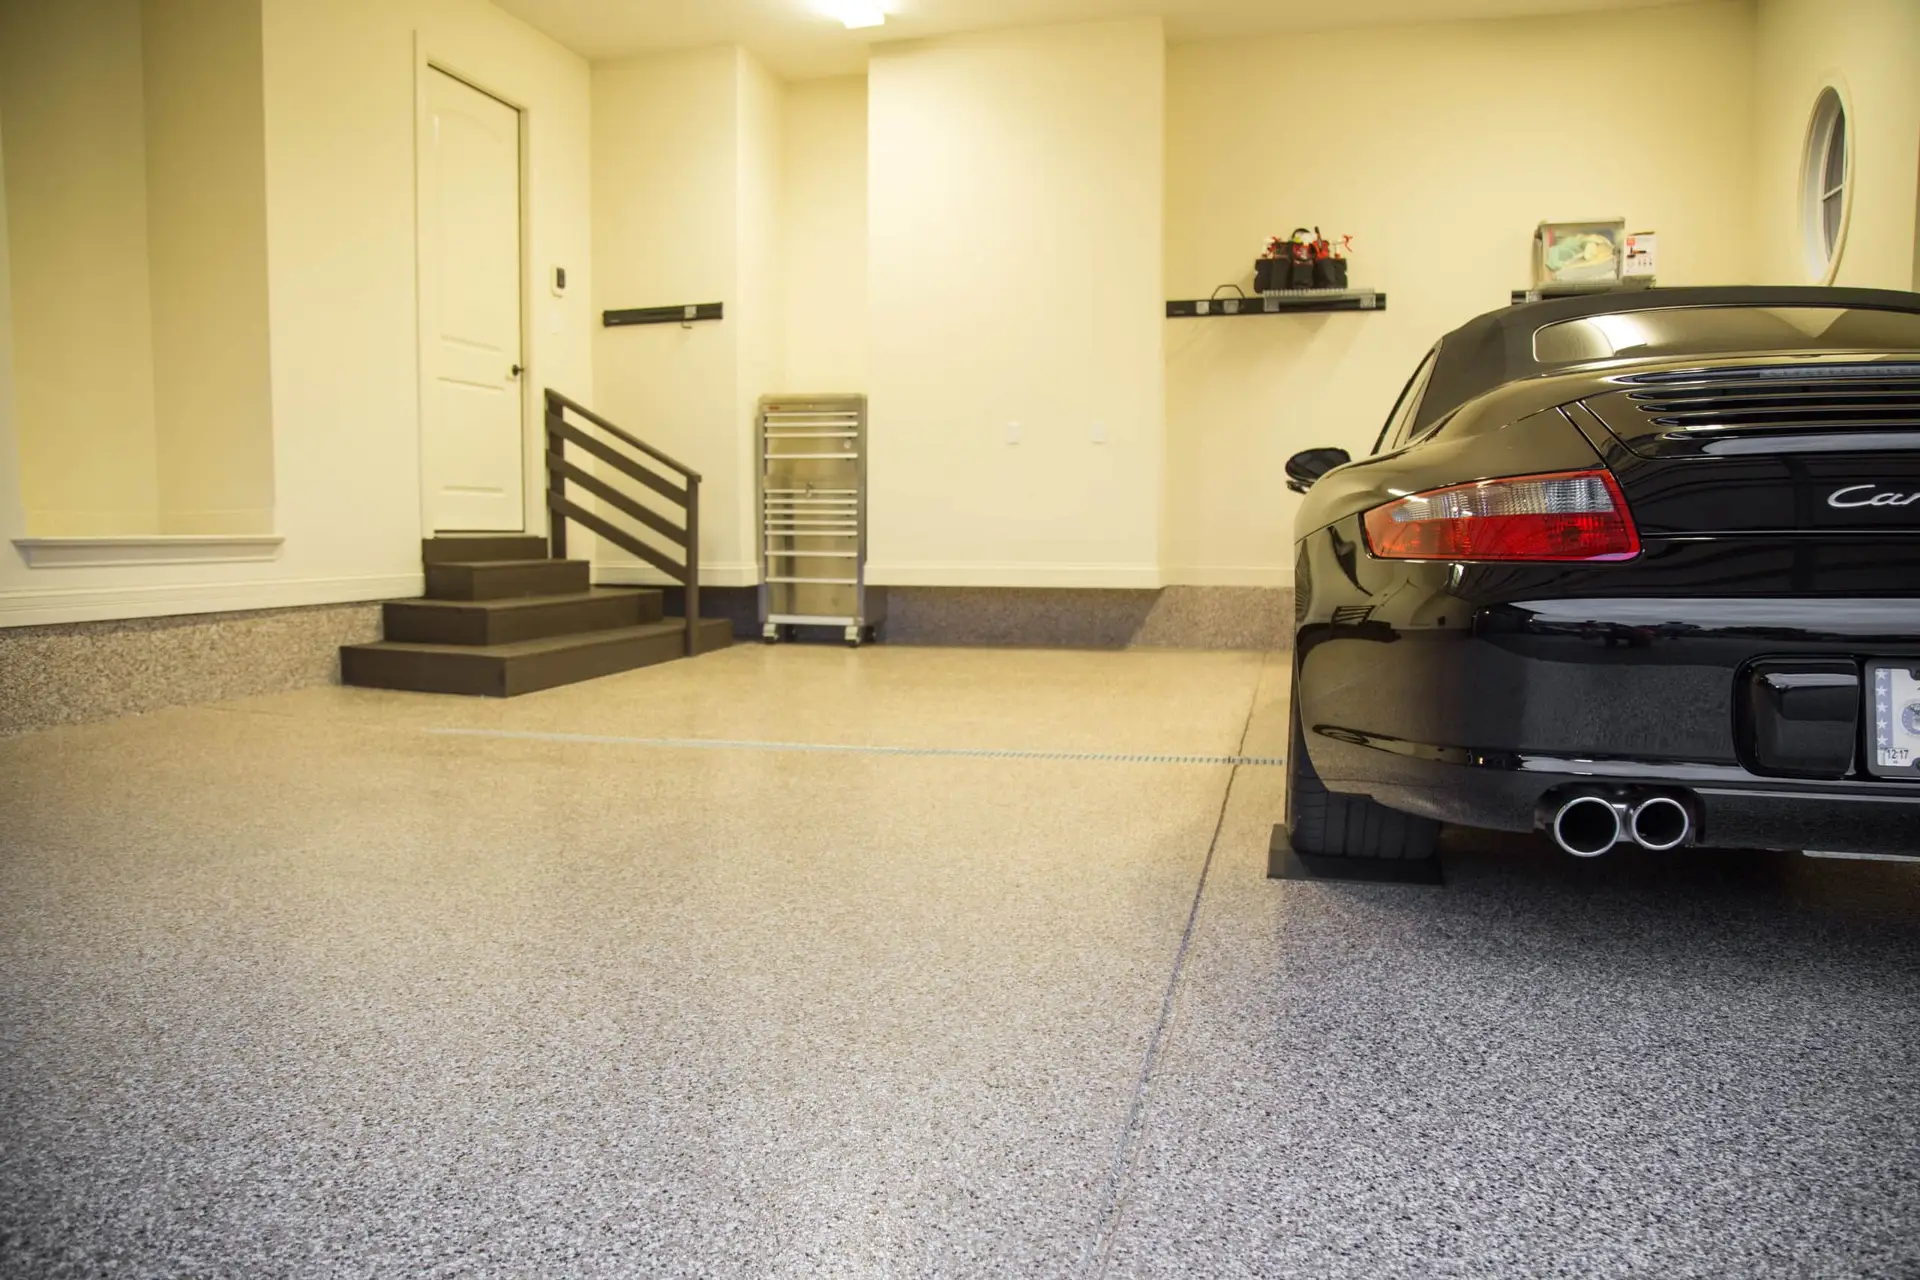 A clean and modern garage with a black sports car parked inside. The garage has beige walls, a speckled floor, and a door leading to the house. Steps with a black railing lead up to the door, and shelves with various items are mounted on the wall.